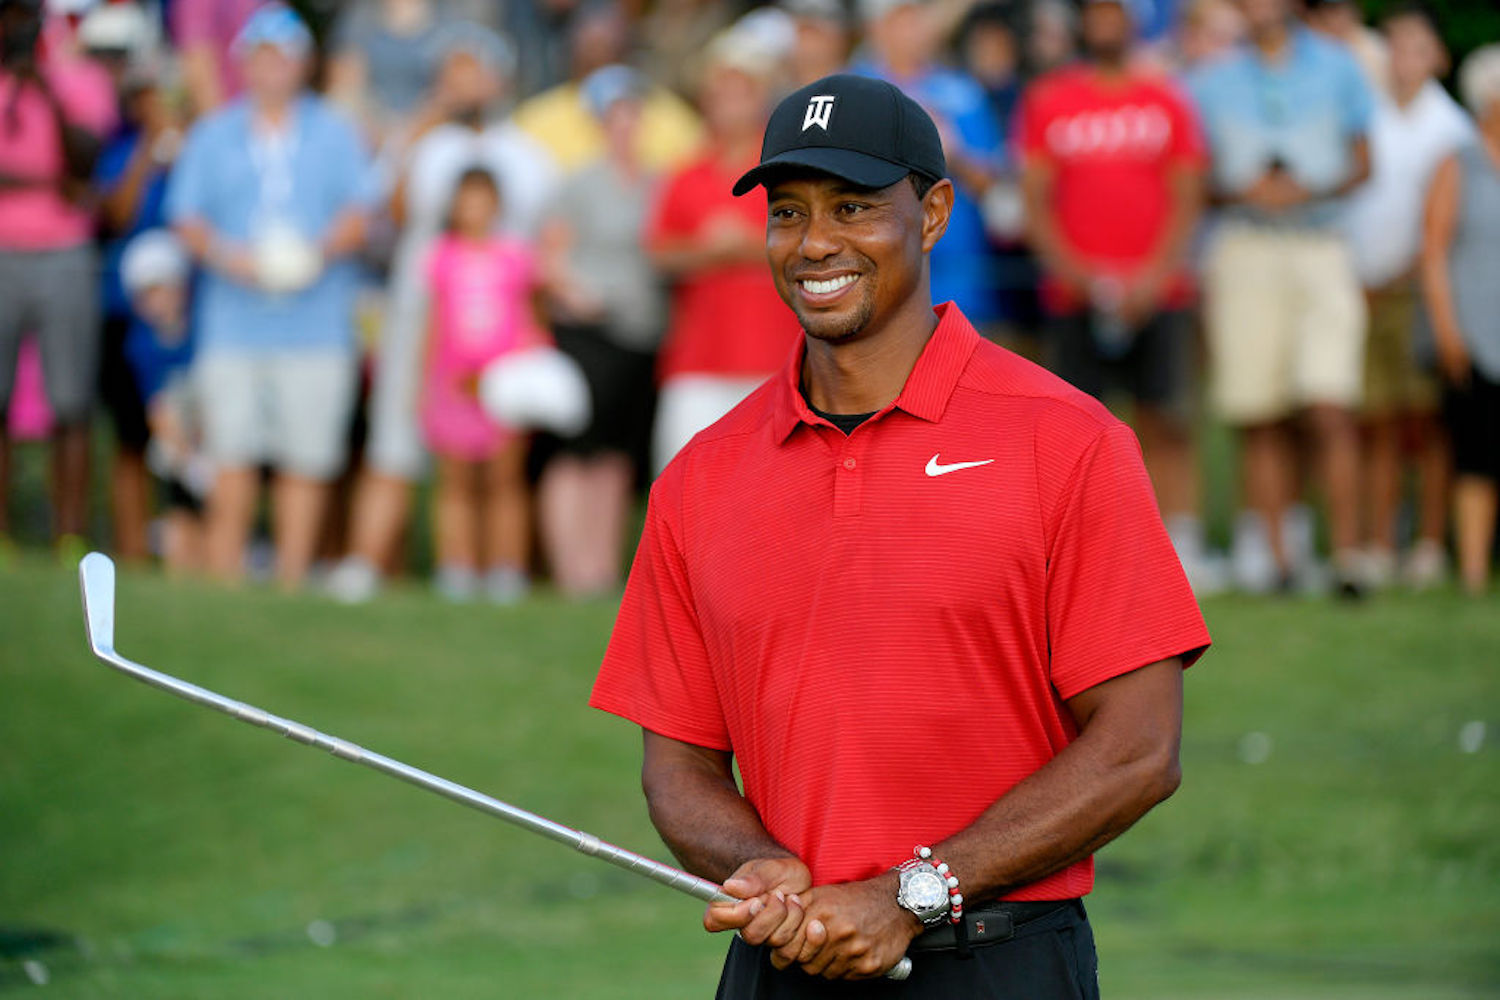 Tiger Woods is the most recognizable golfer in the world, and his iconic nickname is a big reason why. But what is Tiger's real first name?